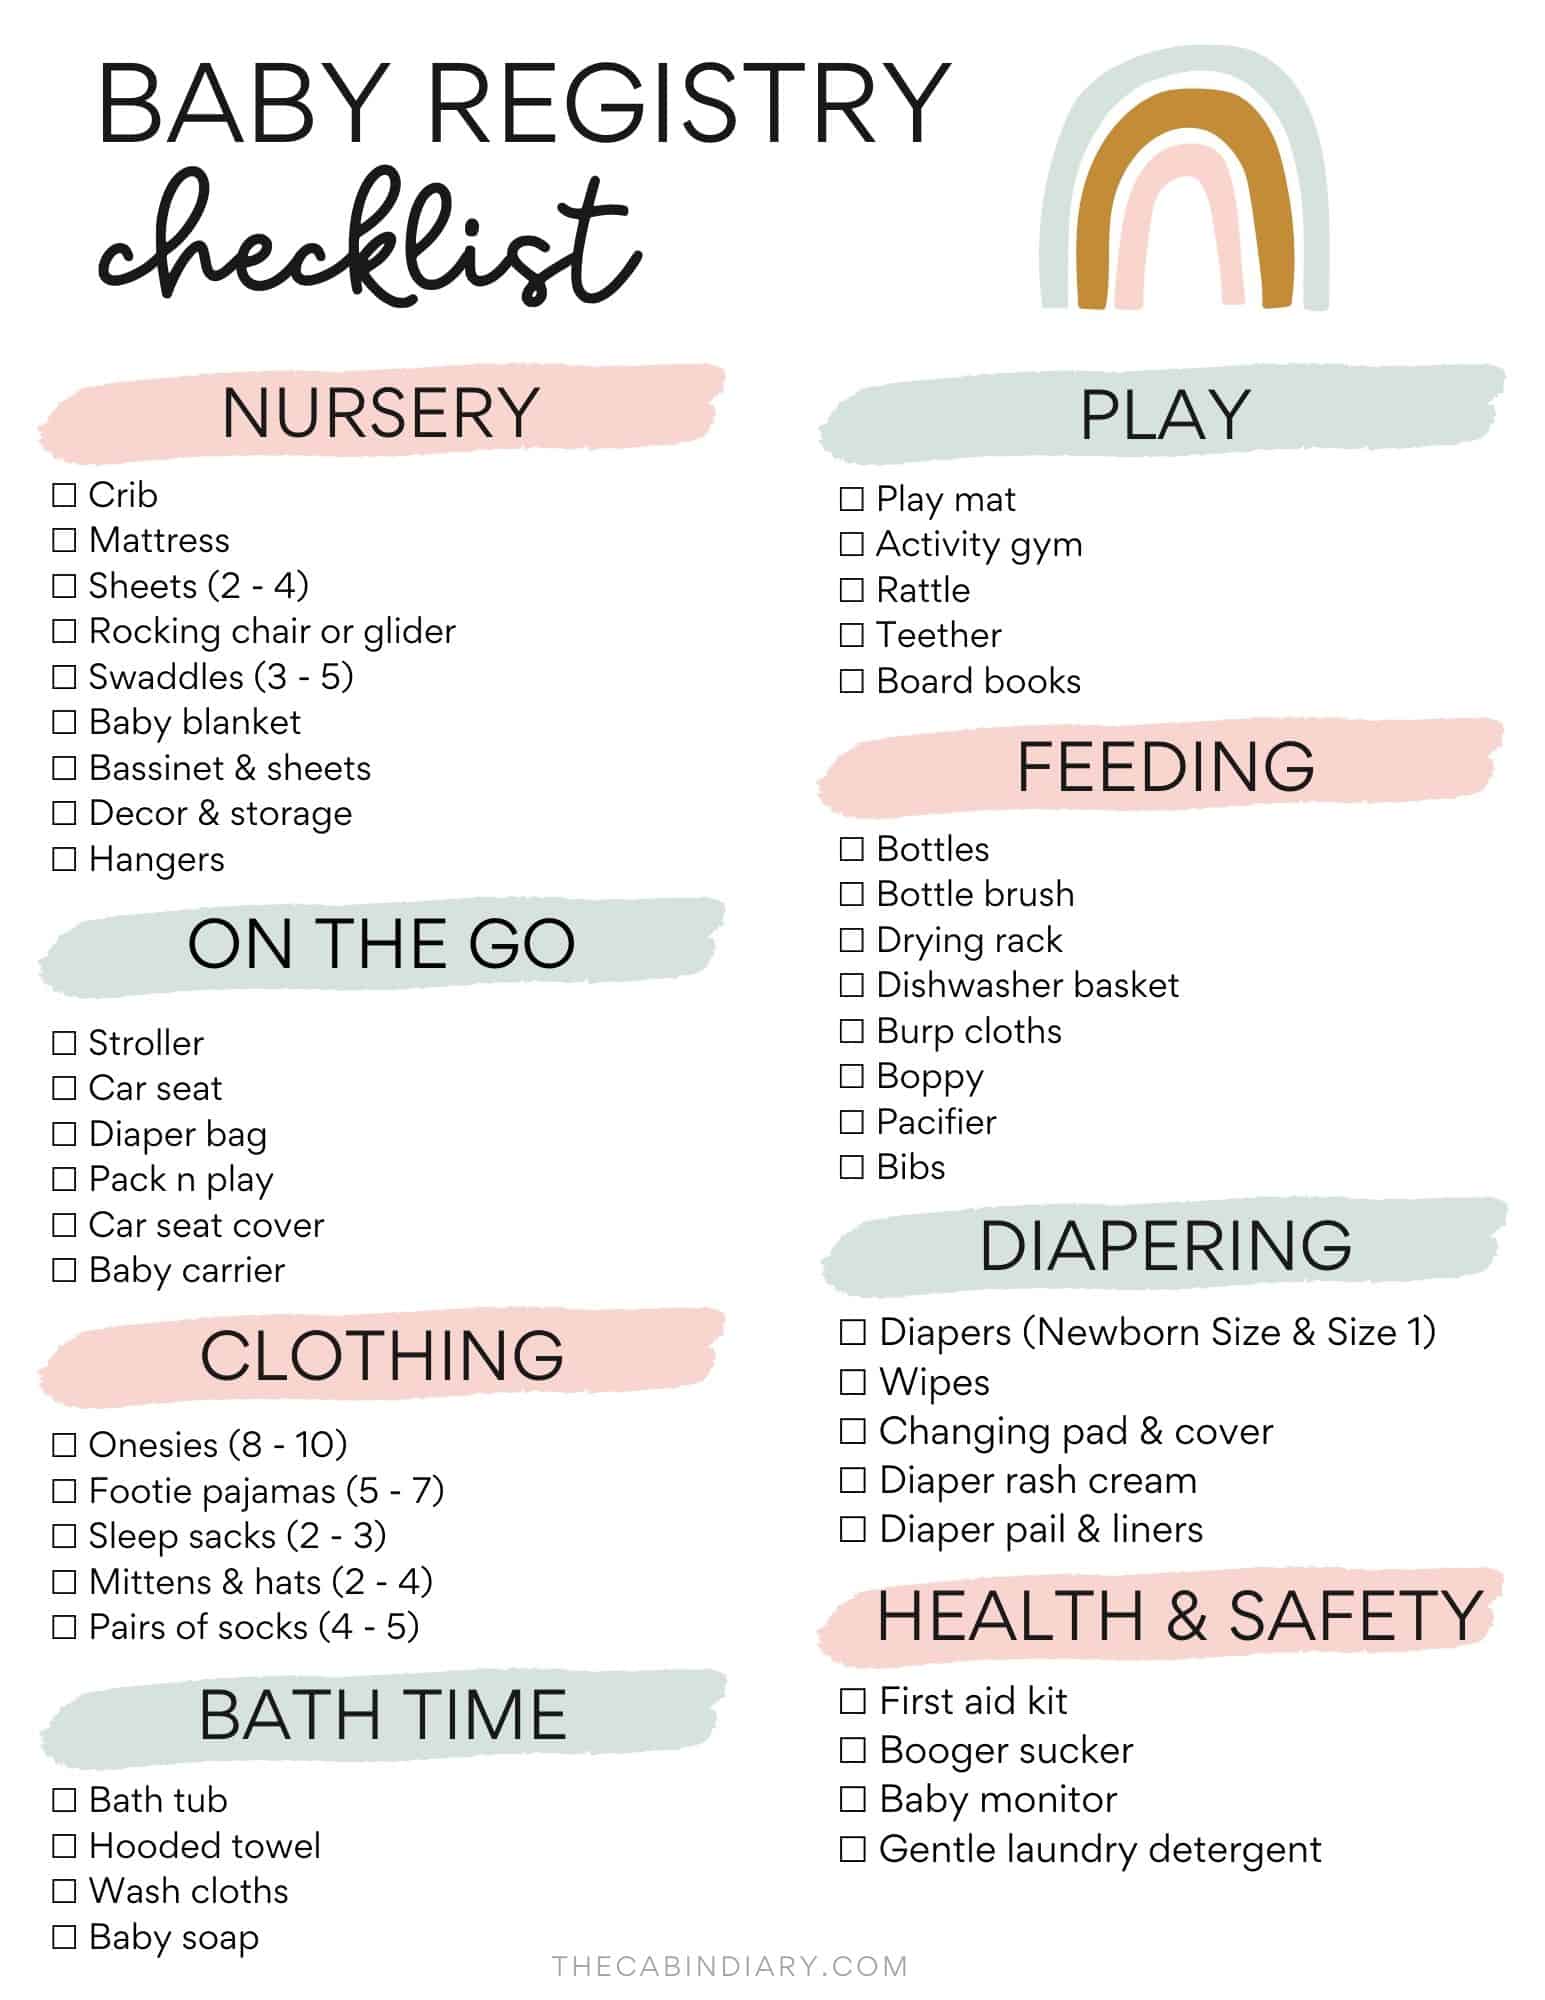 Baby Proofing Checklist: Ten Tips for Playing it Safe